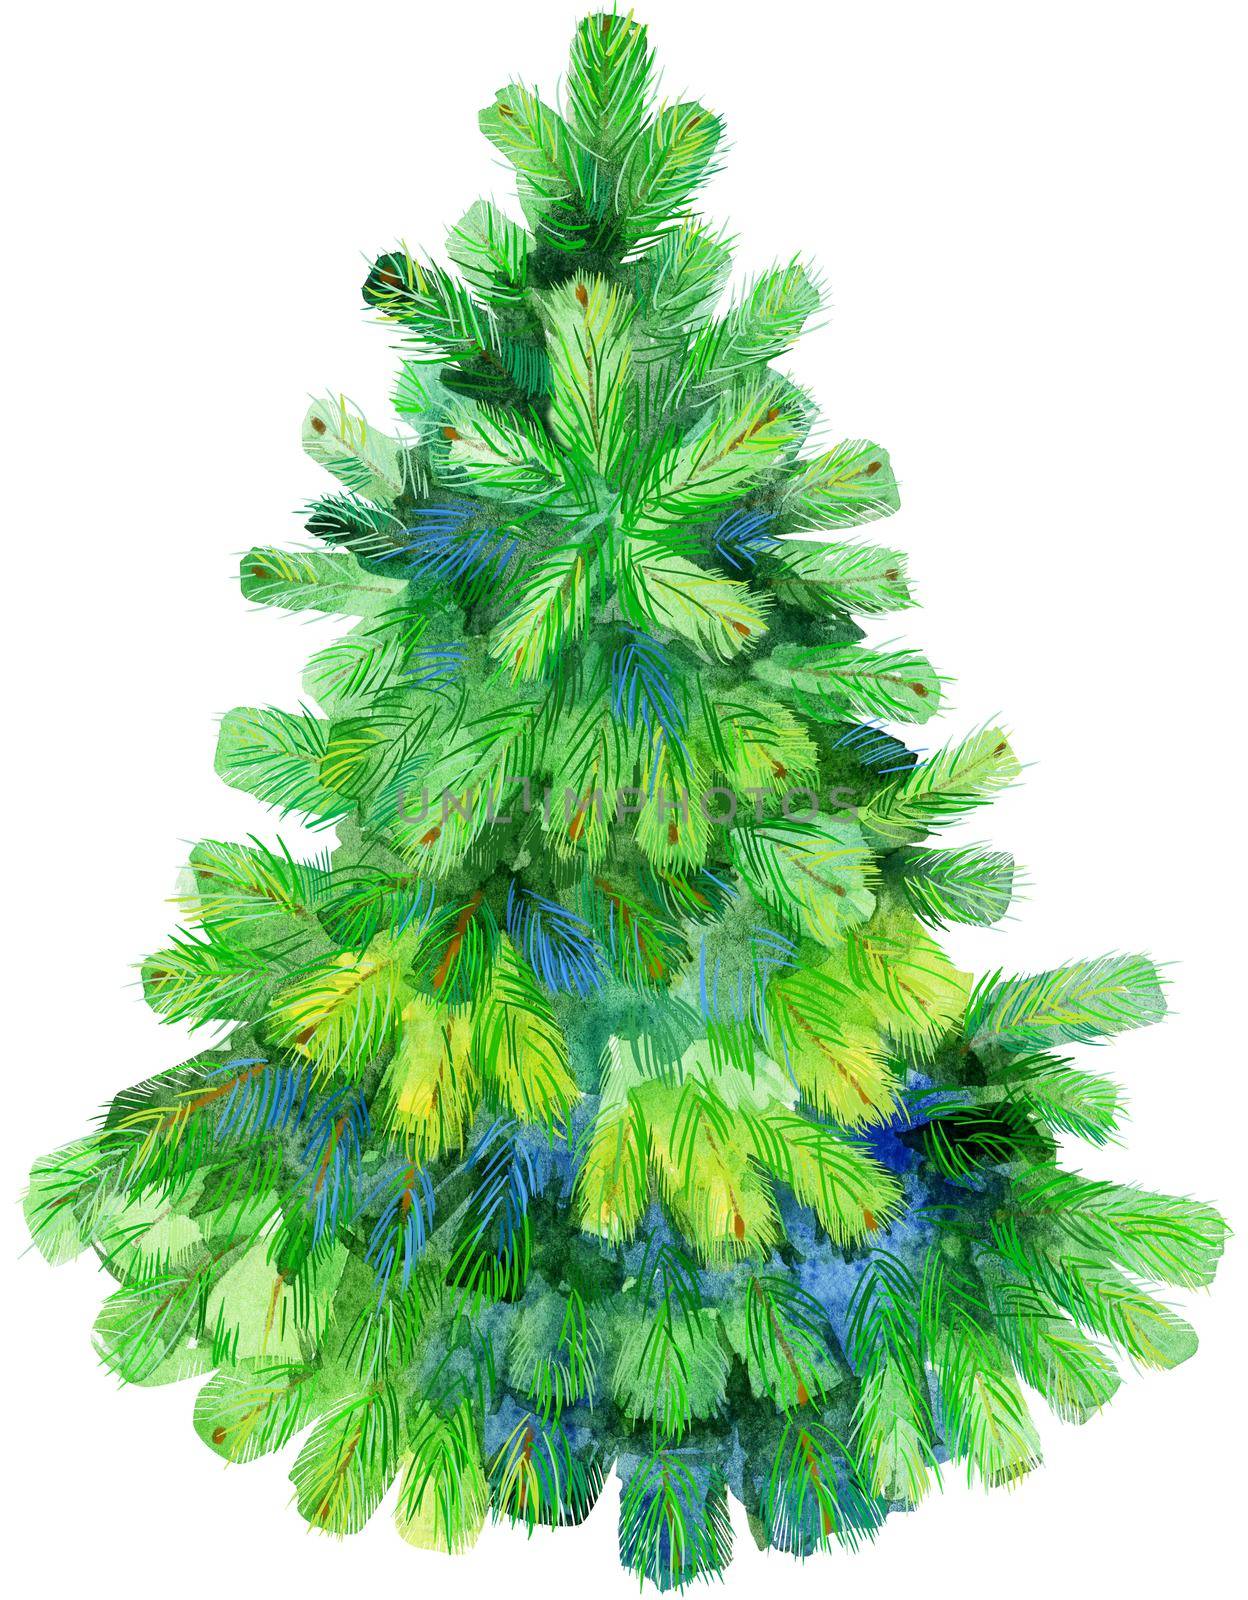 Watercolor green Christmas tree on white background by NataOmsk